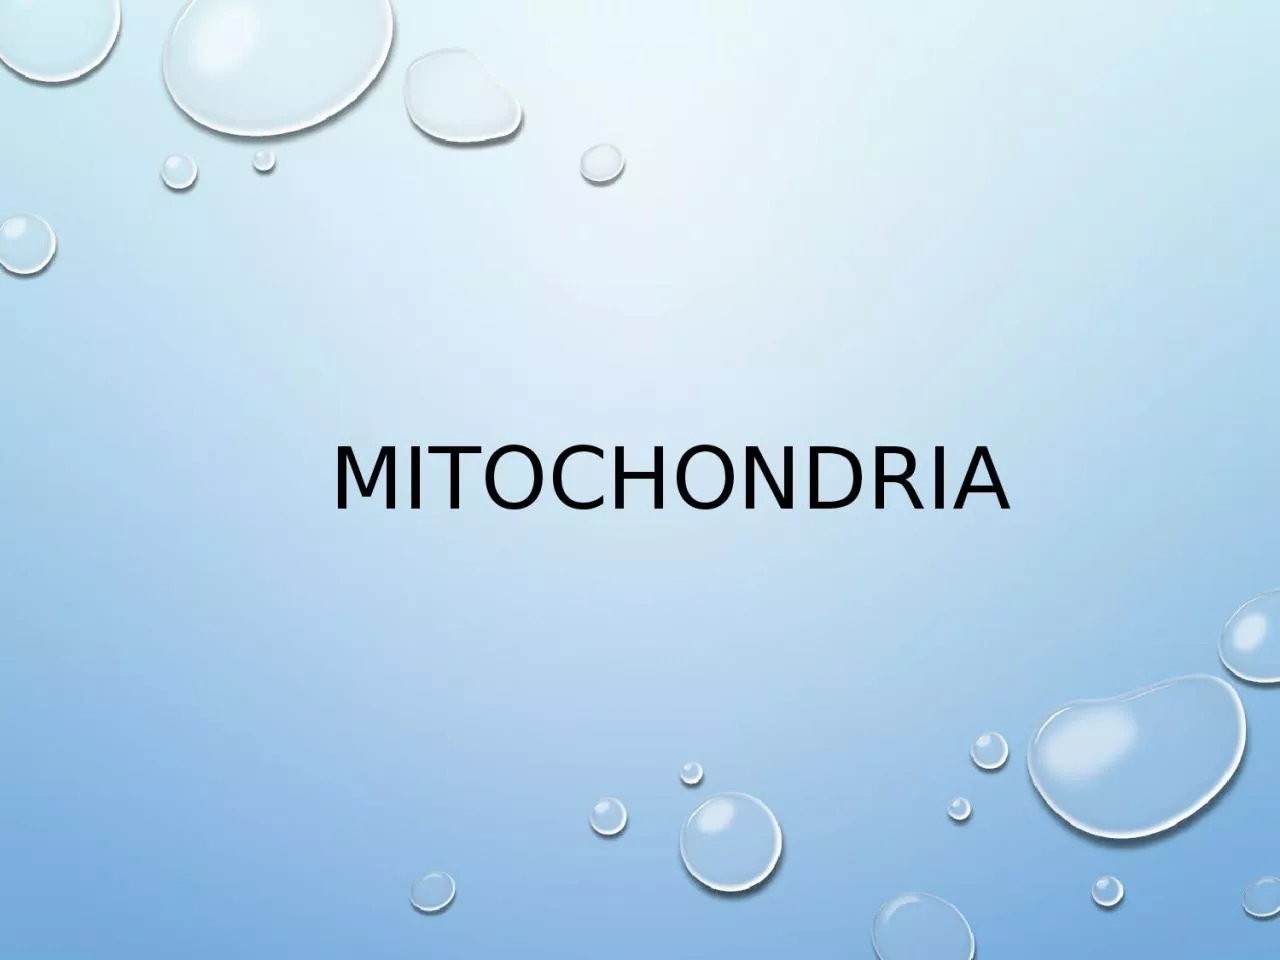 Mitochondria Membrane bound cell organelles, associated with cell respiration, the source